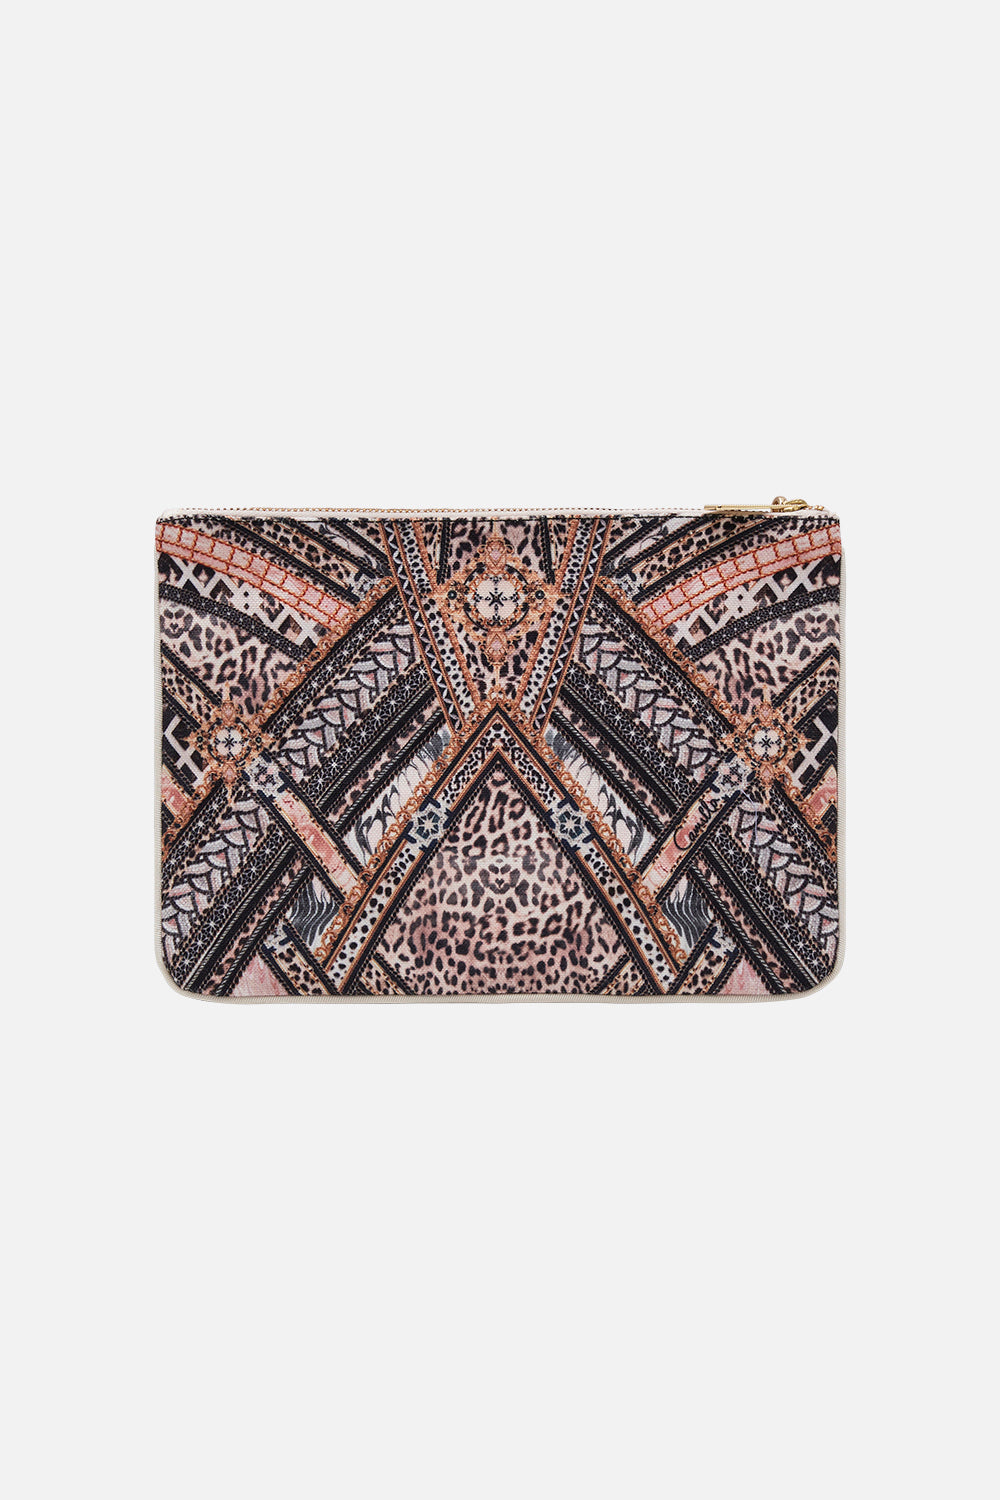 Product view of CAMILLA designer animal print clutch bag in Mosaic Muse